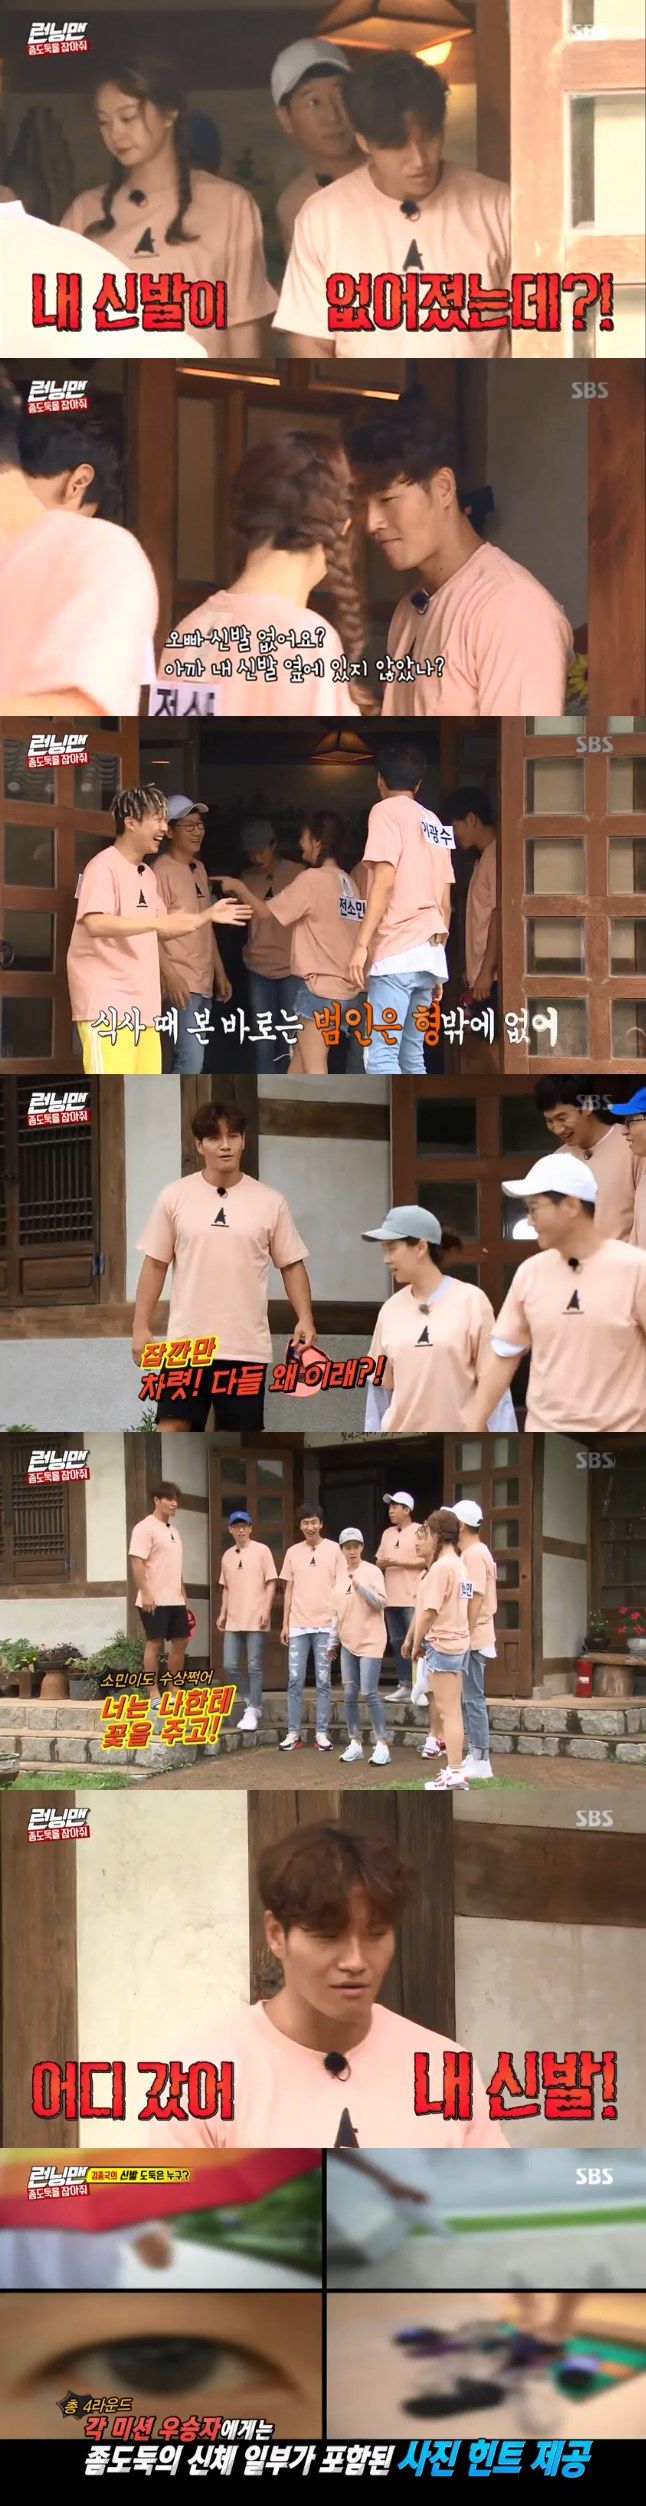 On SBS Running Man broadcasted on the 29th, the Little Thief search mission was given to take Kim Jong-kook shoes.The members, who all ate together at the restaurant, began to buy Kim Jong-kooks suspicions; Kim Jong-kook suspected, Christ, everyone is suspicious.In particular, Kim Jong-kook told Jeon So-min: Why give me flowers, not the one who gives me that, why did you try to sit next to me?Its a misunderstanding, I was just trying not to sit next to it, said Jeon So-min, laughing.Ji Suk-jin also made the list of the award-winning: Oh yes, theres such a mission, with an awkward fit, making the members laugh.